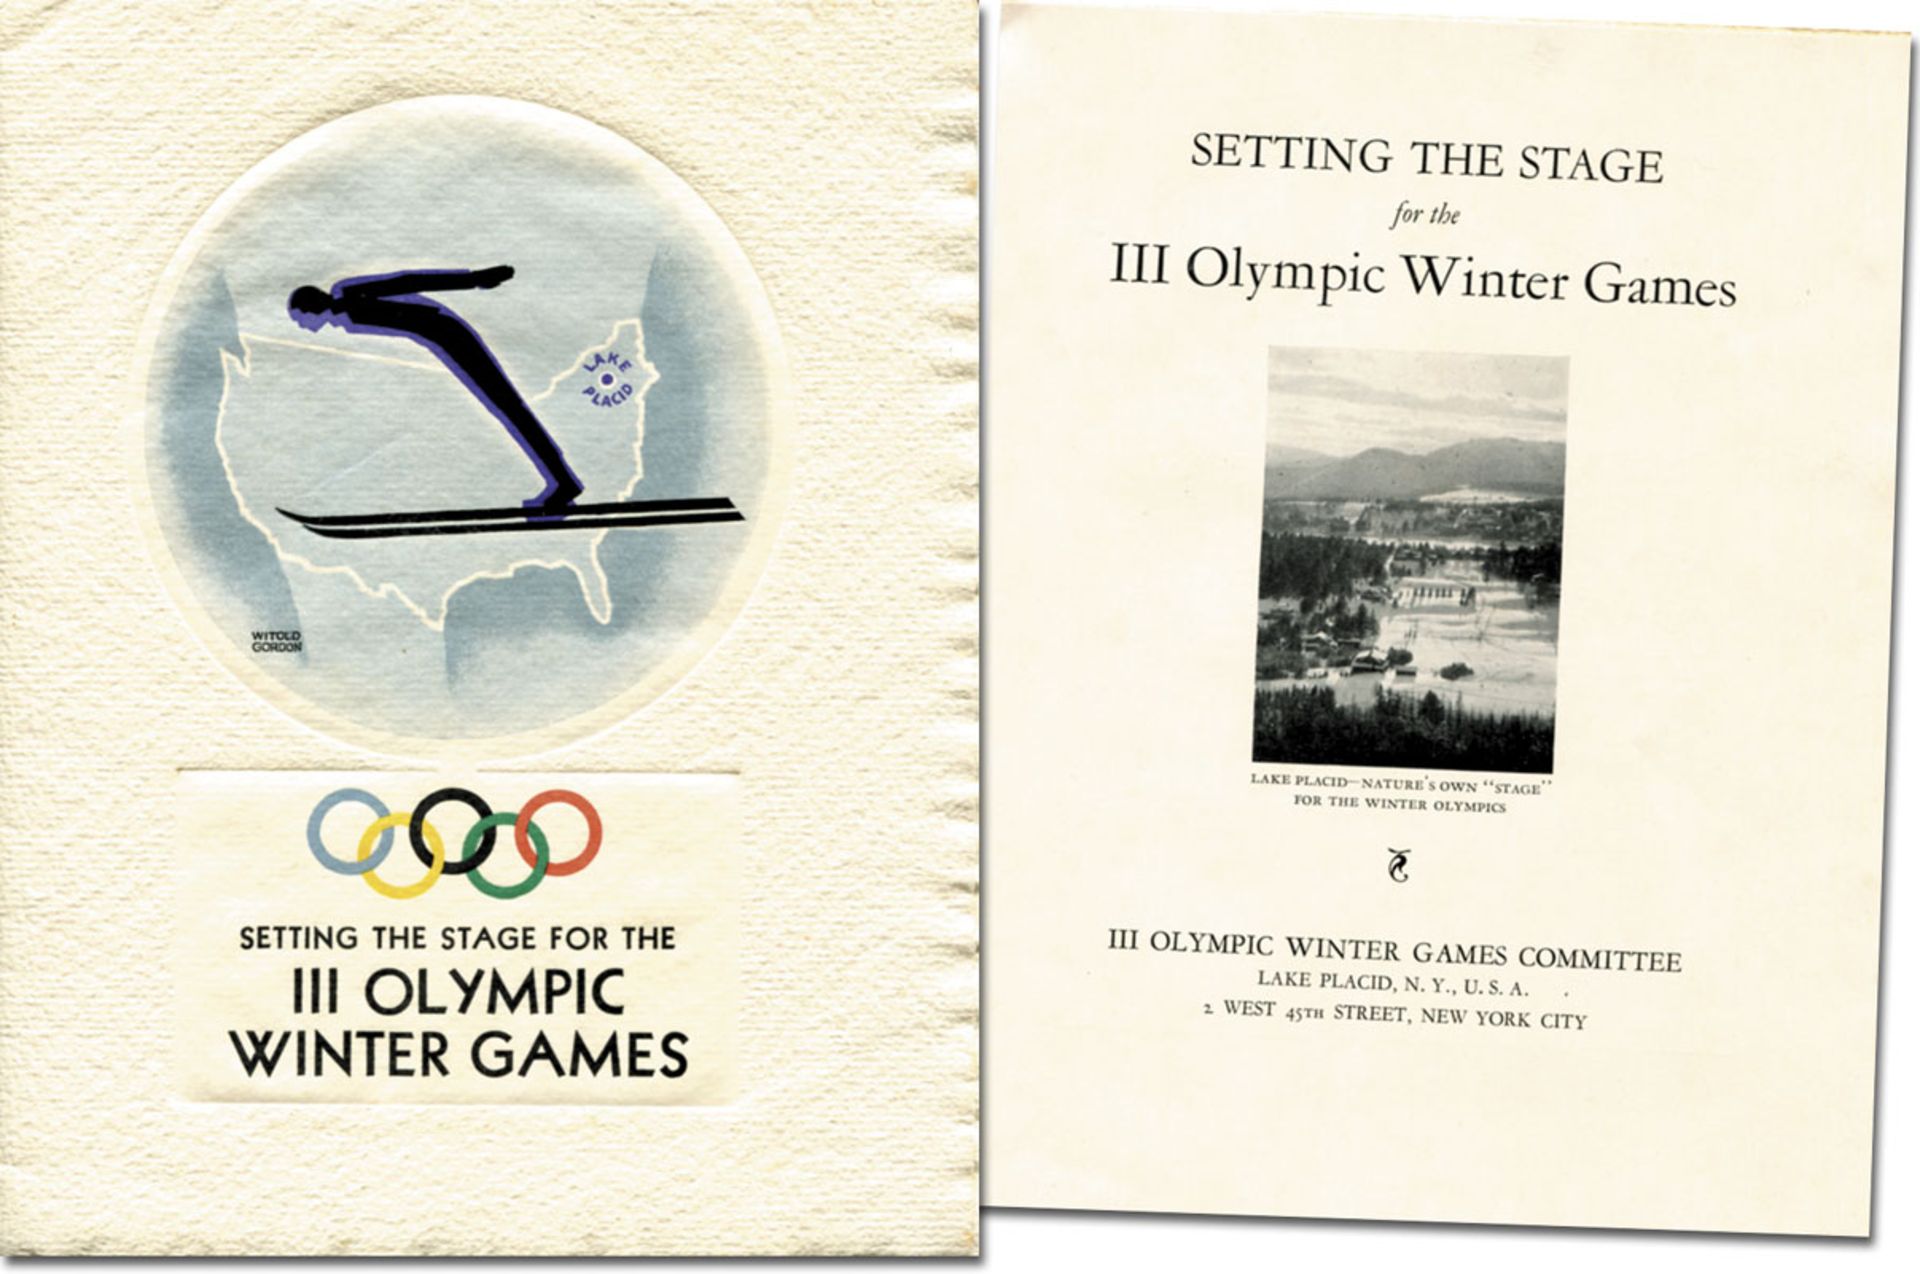 Olympic Winter Games 1932 Official Bulletin - Setting the Stage for the III Olympic Winter Games. Of